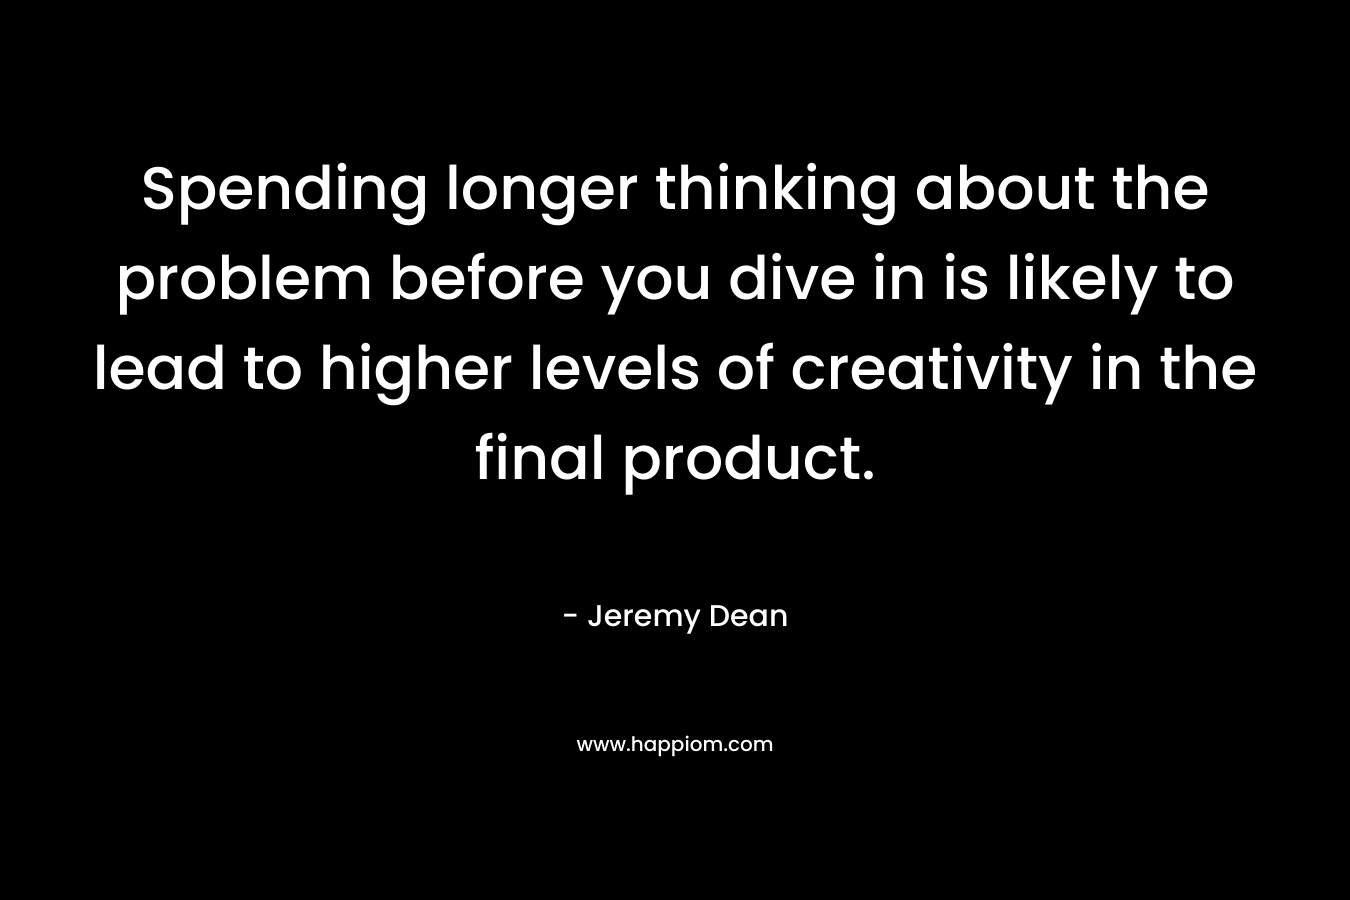 Spending longer thinking about the problem before you dive in is likely to lead to higher levels of creativity in the final product.